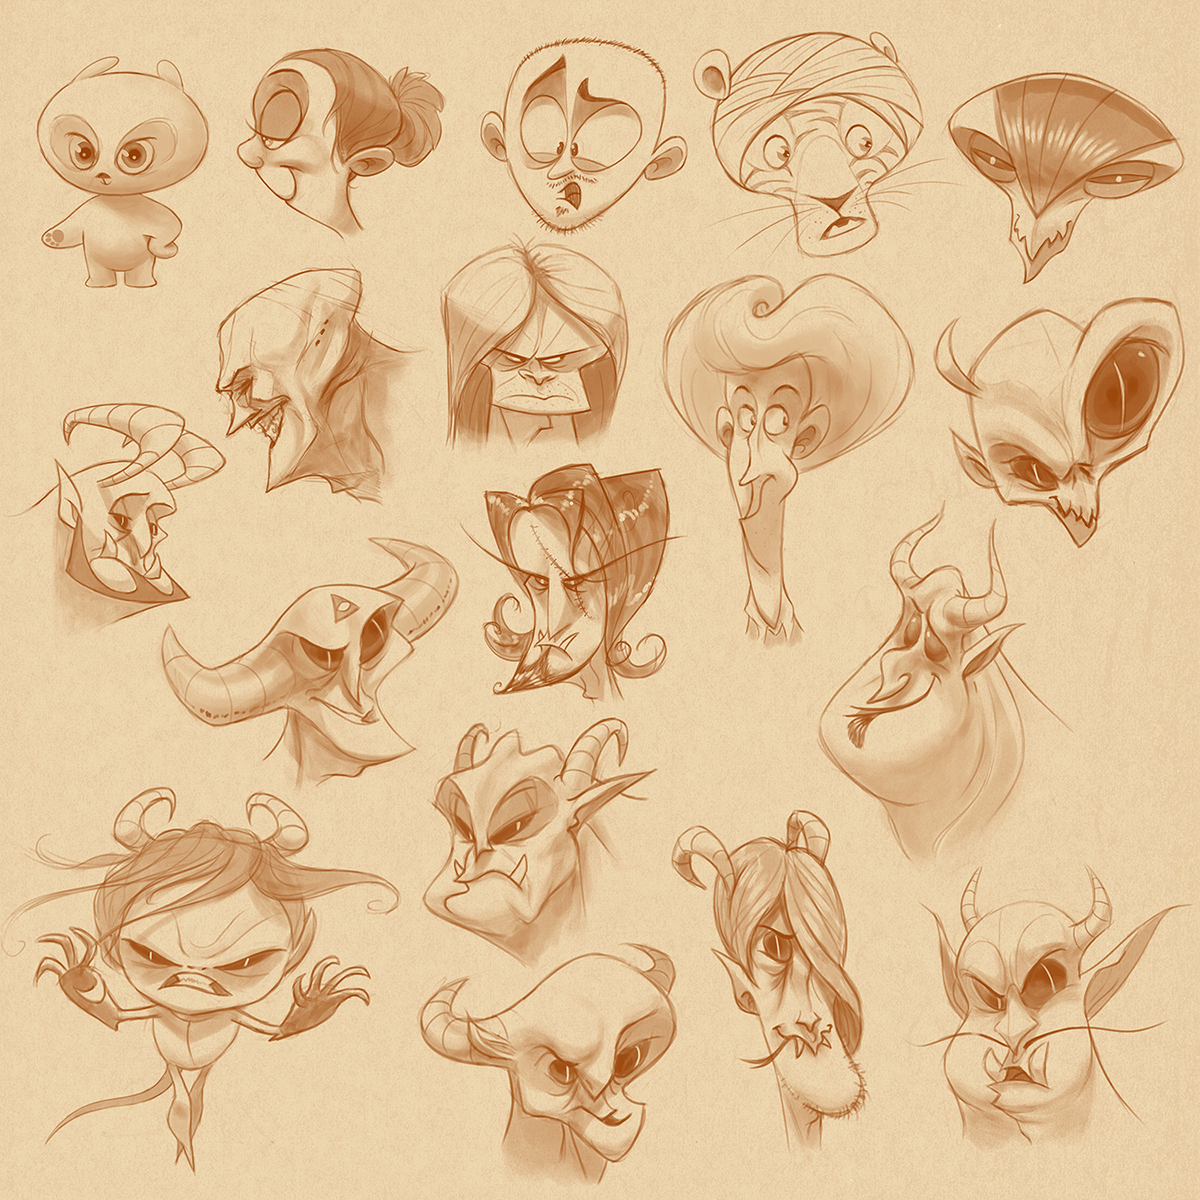 characters sketches Demons